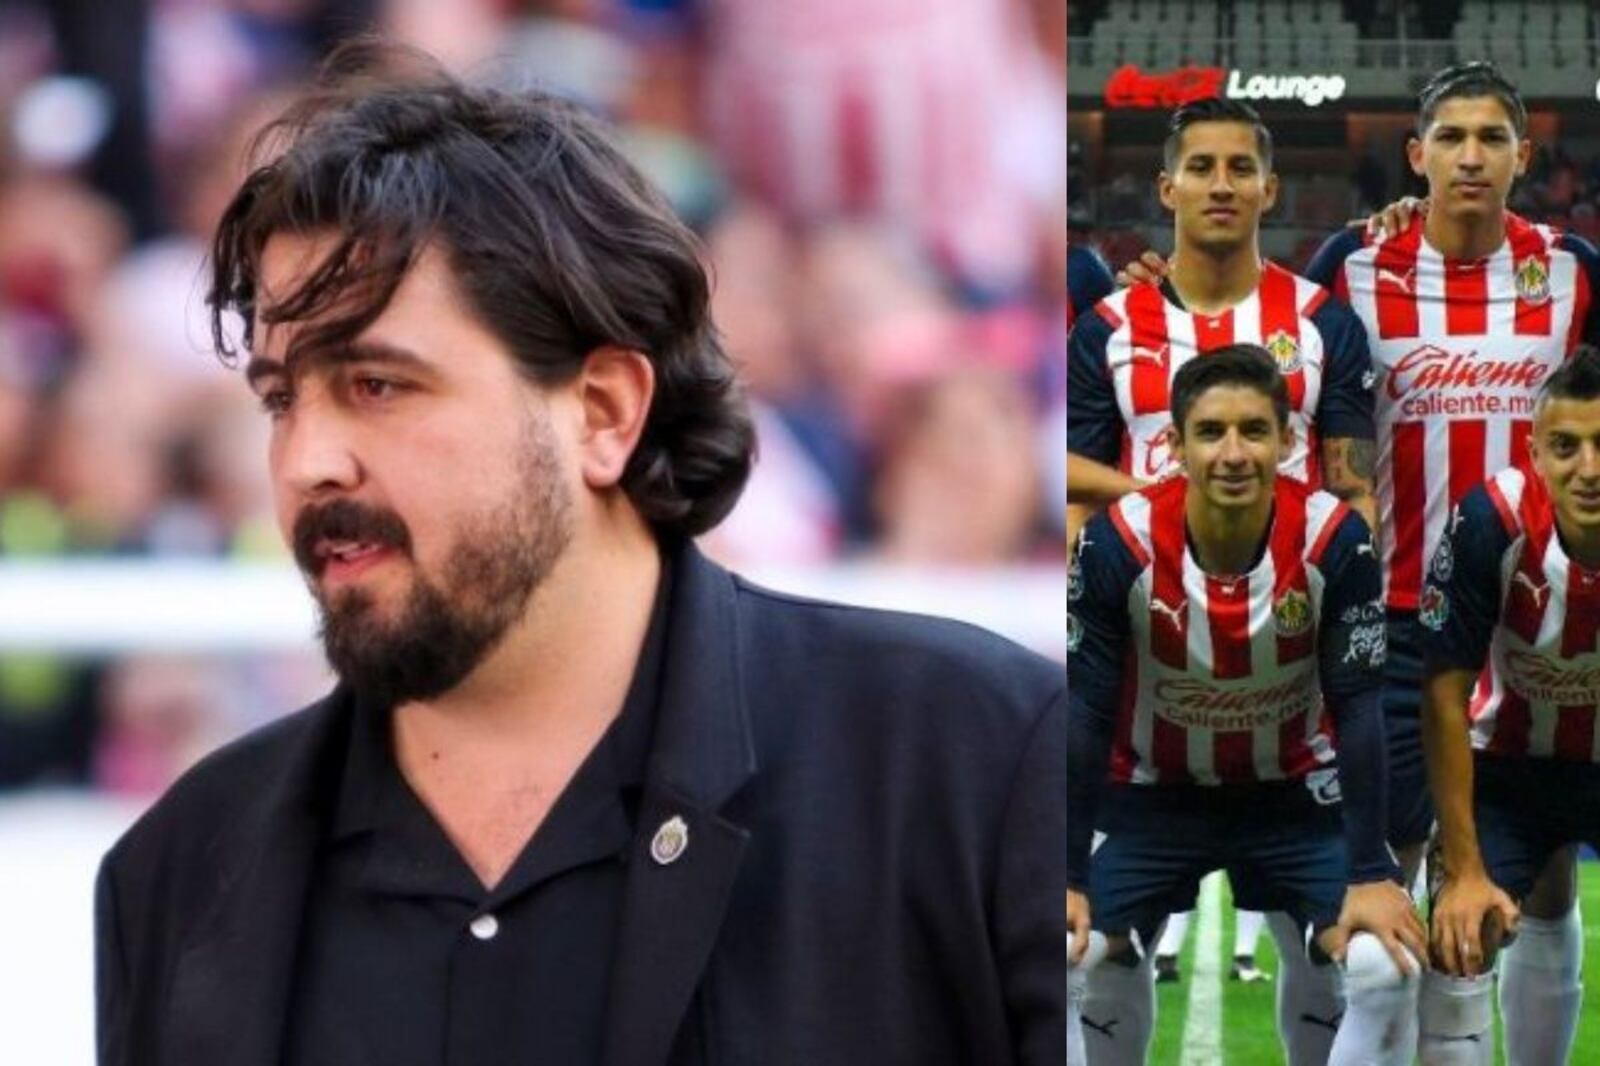 Farewell to tradition, Chivas hires a foreigner and paralyzes Mexico